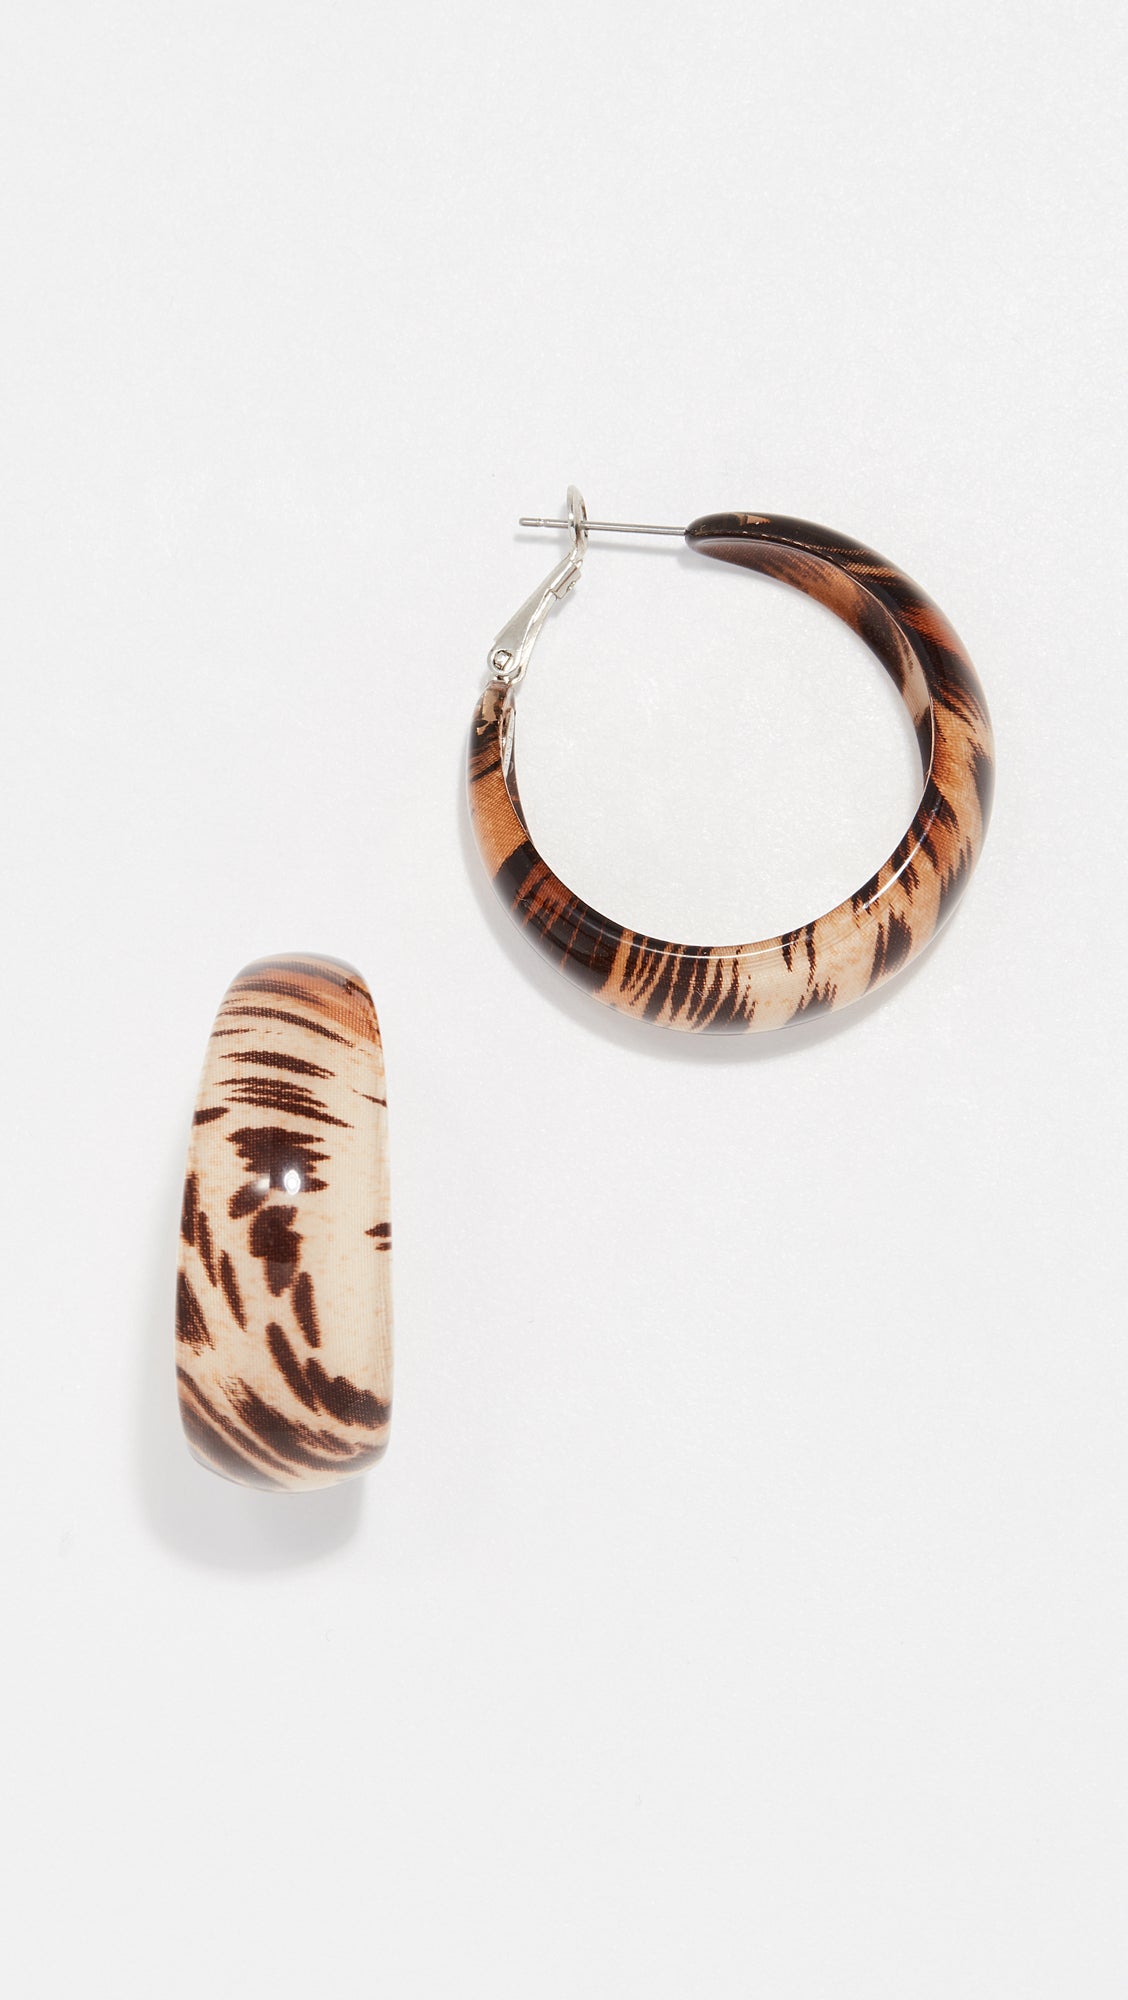 Get Wild This Spring With These Fabulous Animal Print Picks Under $100